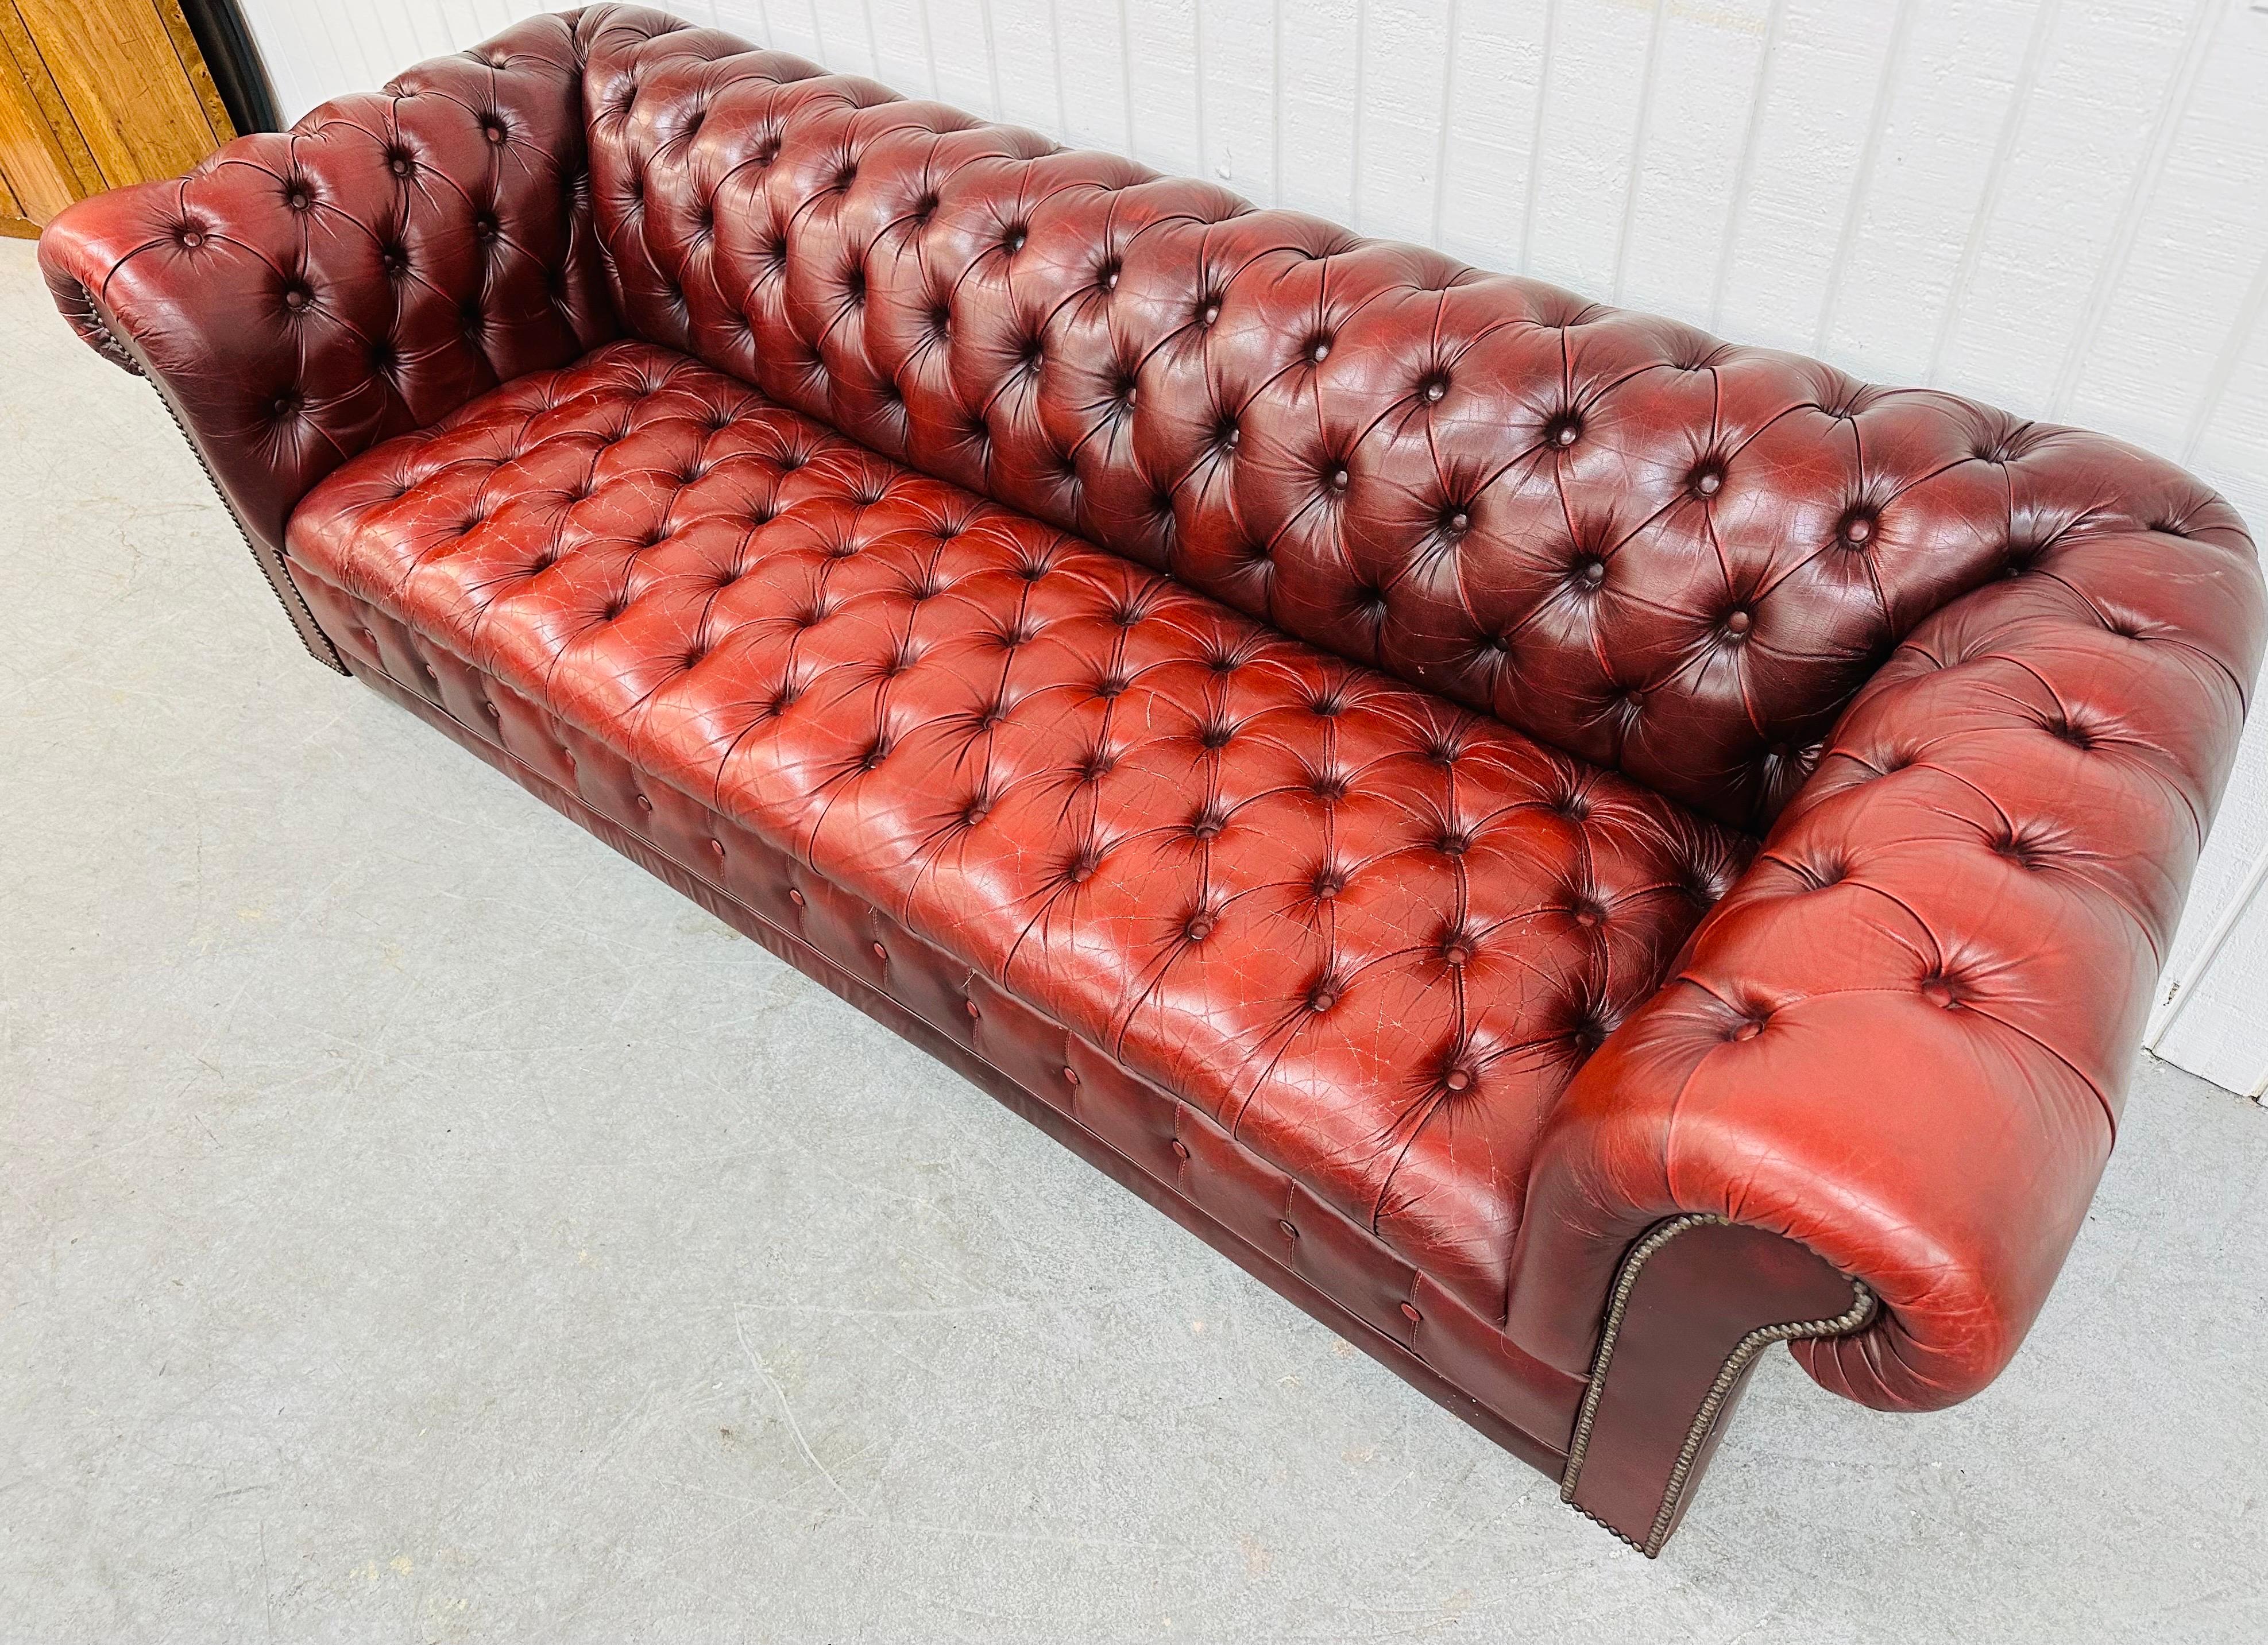 This listing is for a Modern Red Chesterfield Sofa. Featuring an iconic tufted button chesterfield style, a beautiful dark red leather upholstery, nailhead accents, and bun feet. This is an exceptional combination of quality and design!